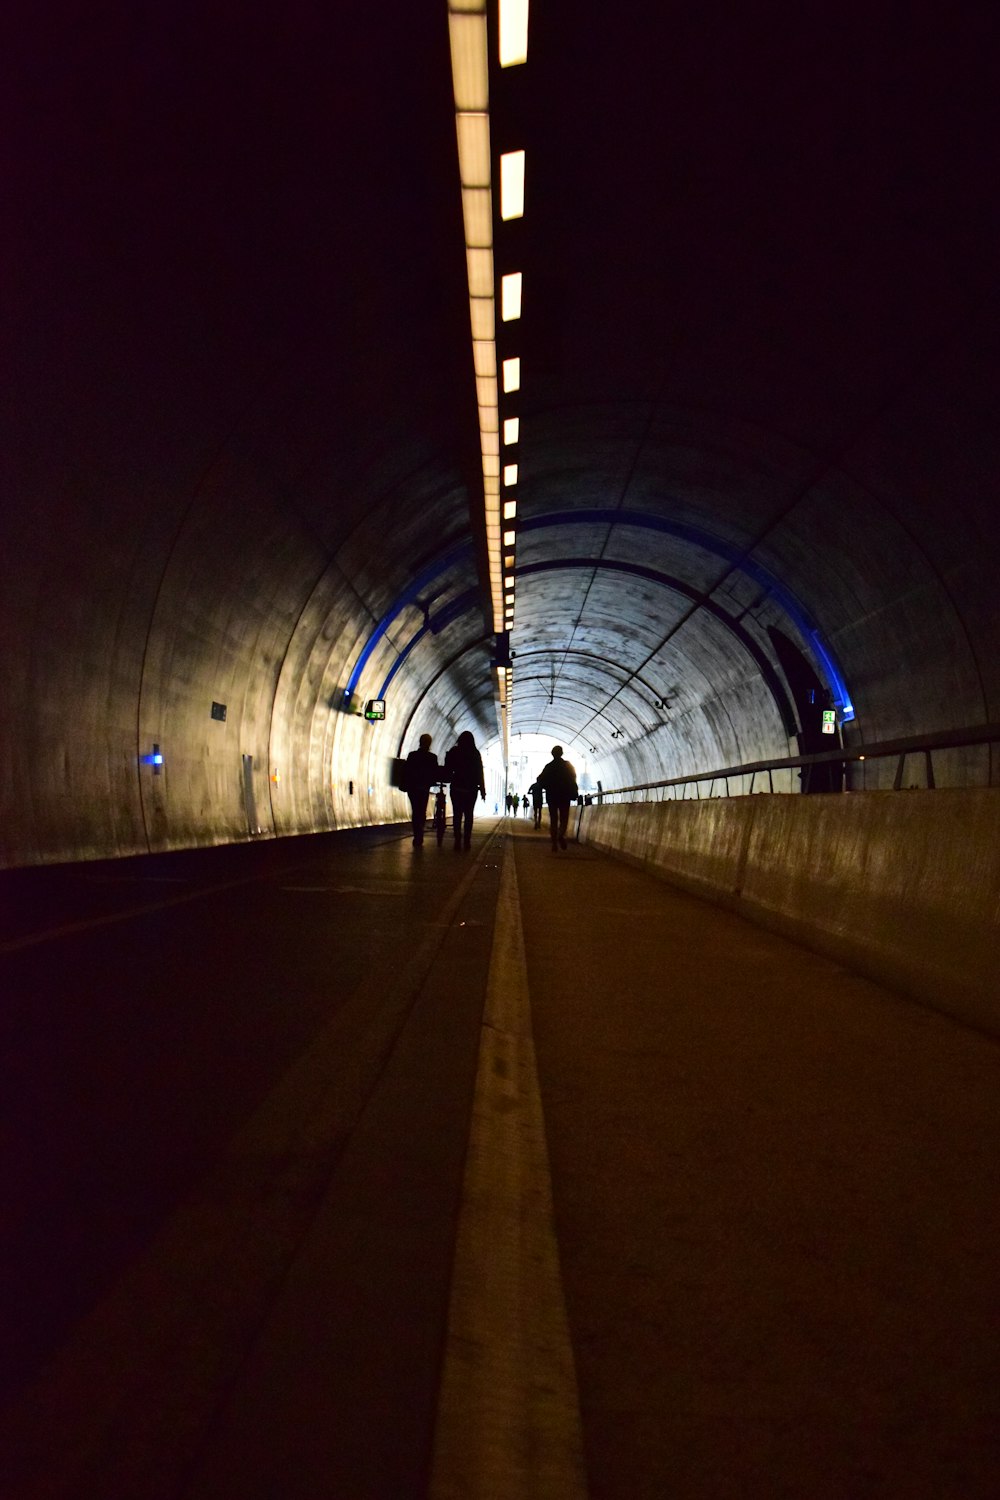 a group of people walking through a tunnel at night